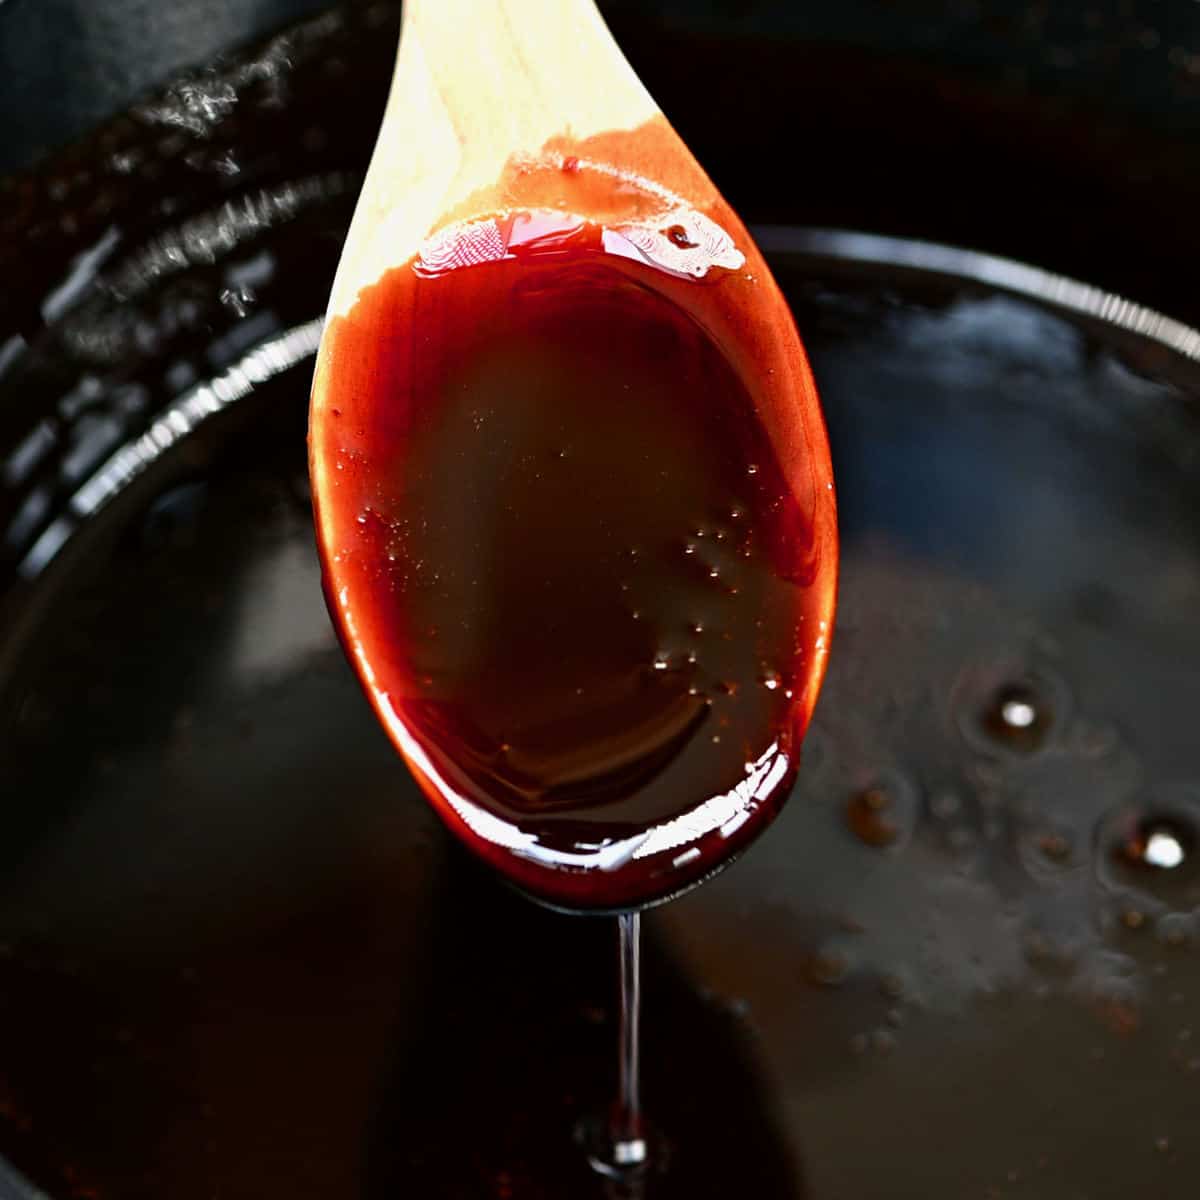 A spoonful of homemade date syrup